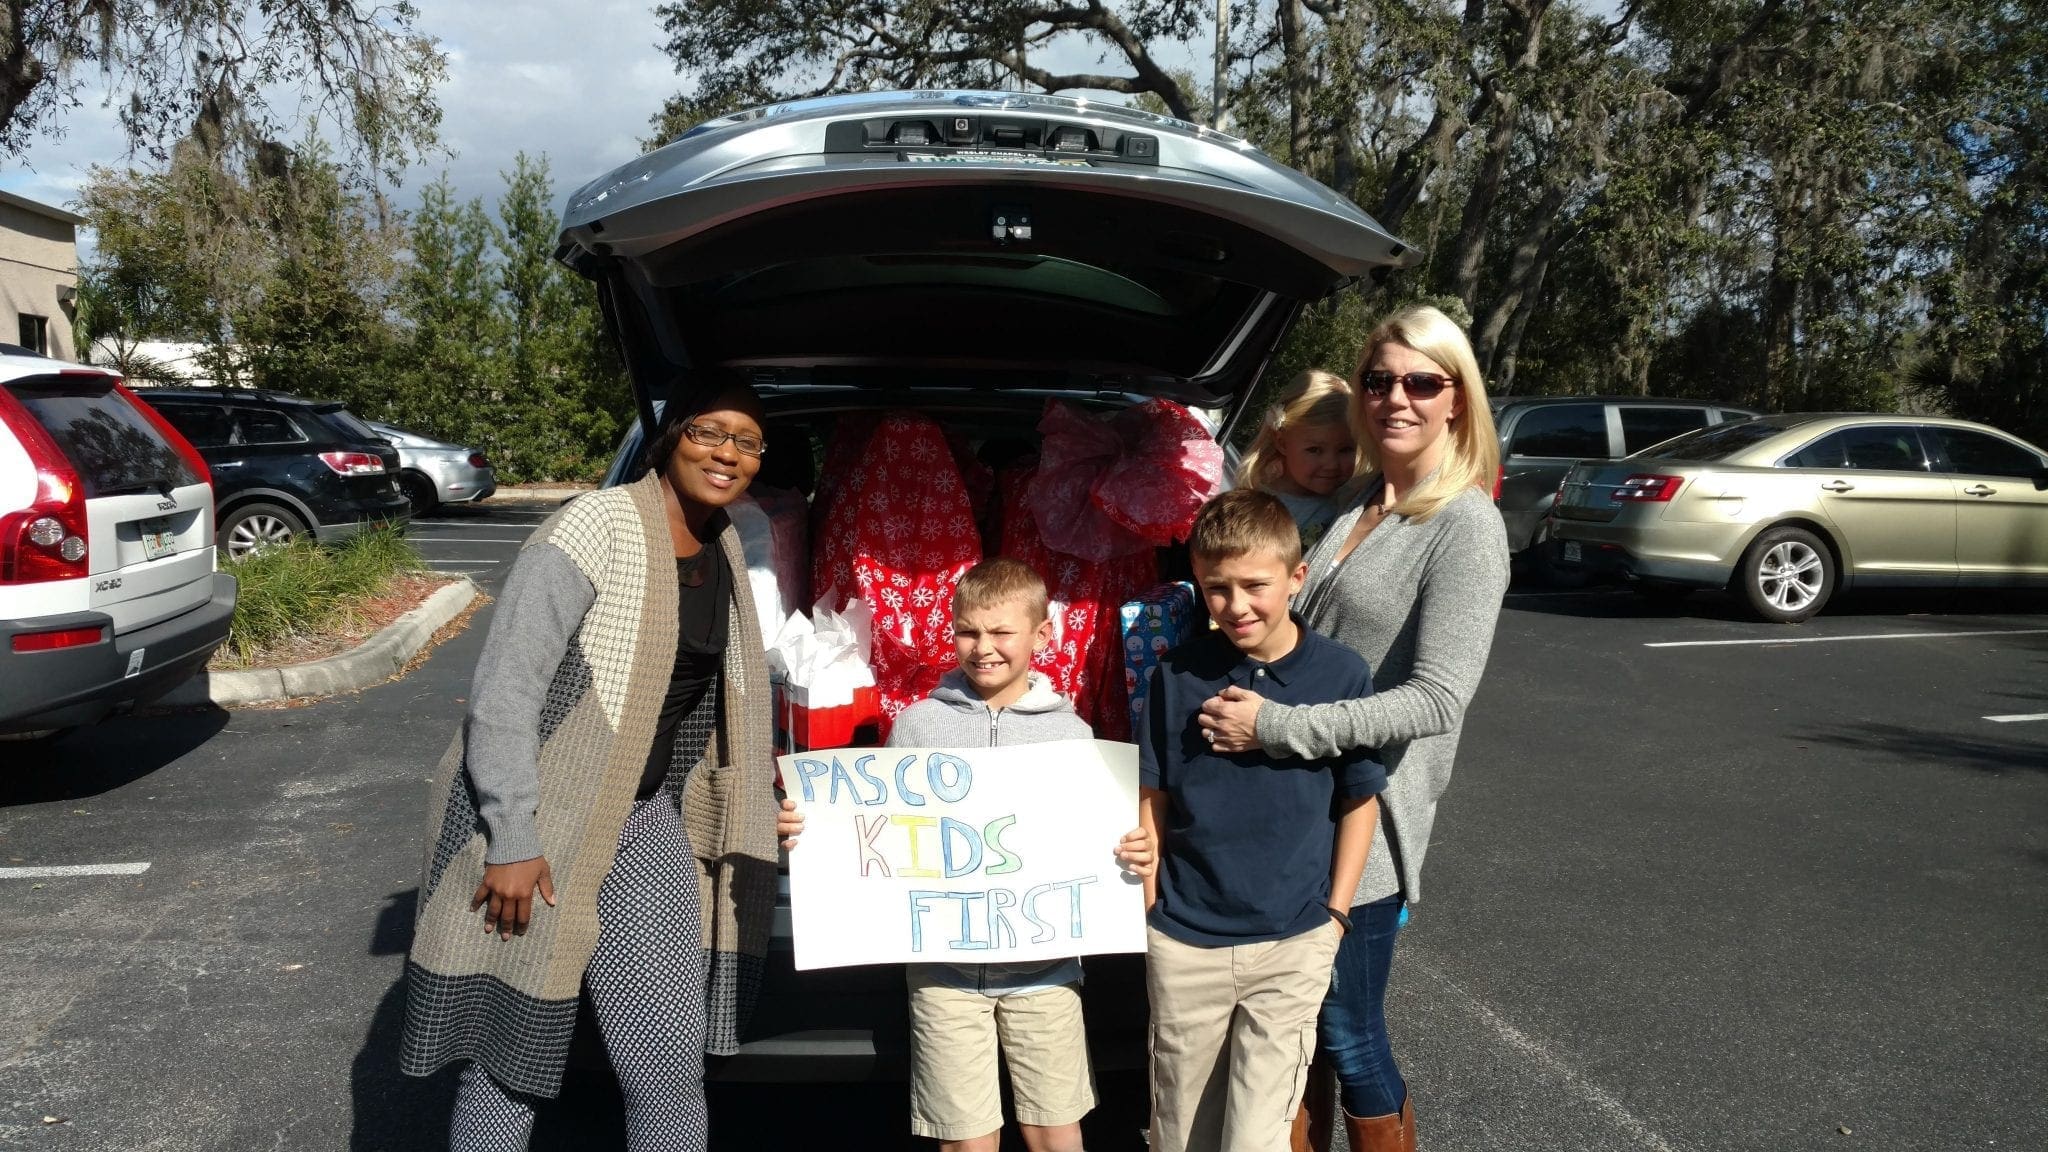 Kienast family organizes drive collecting $1,600 in gifts for kids